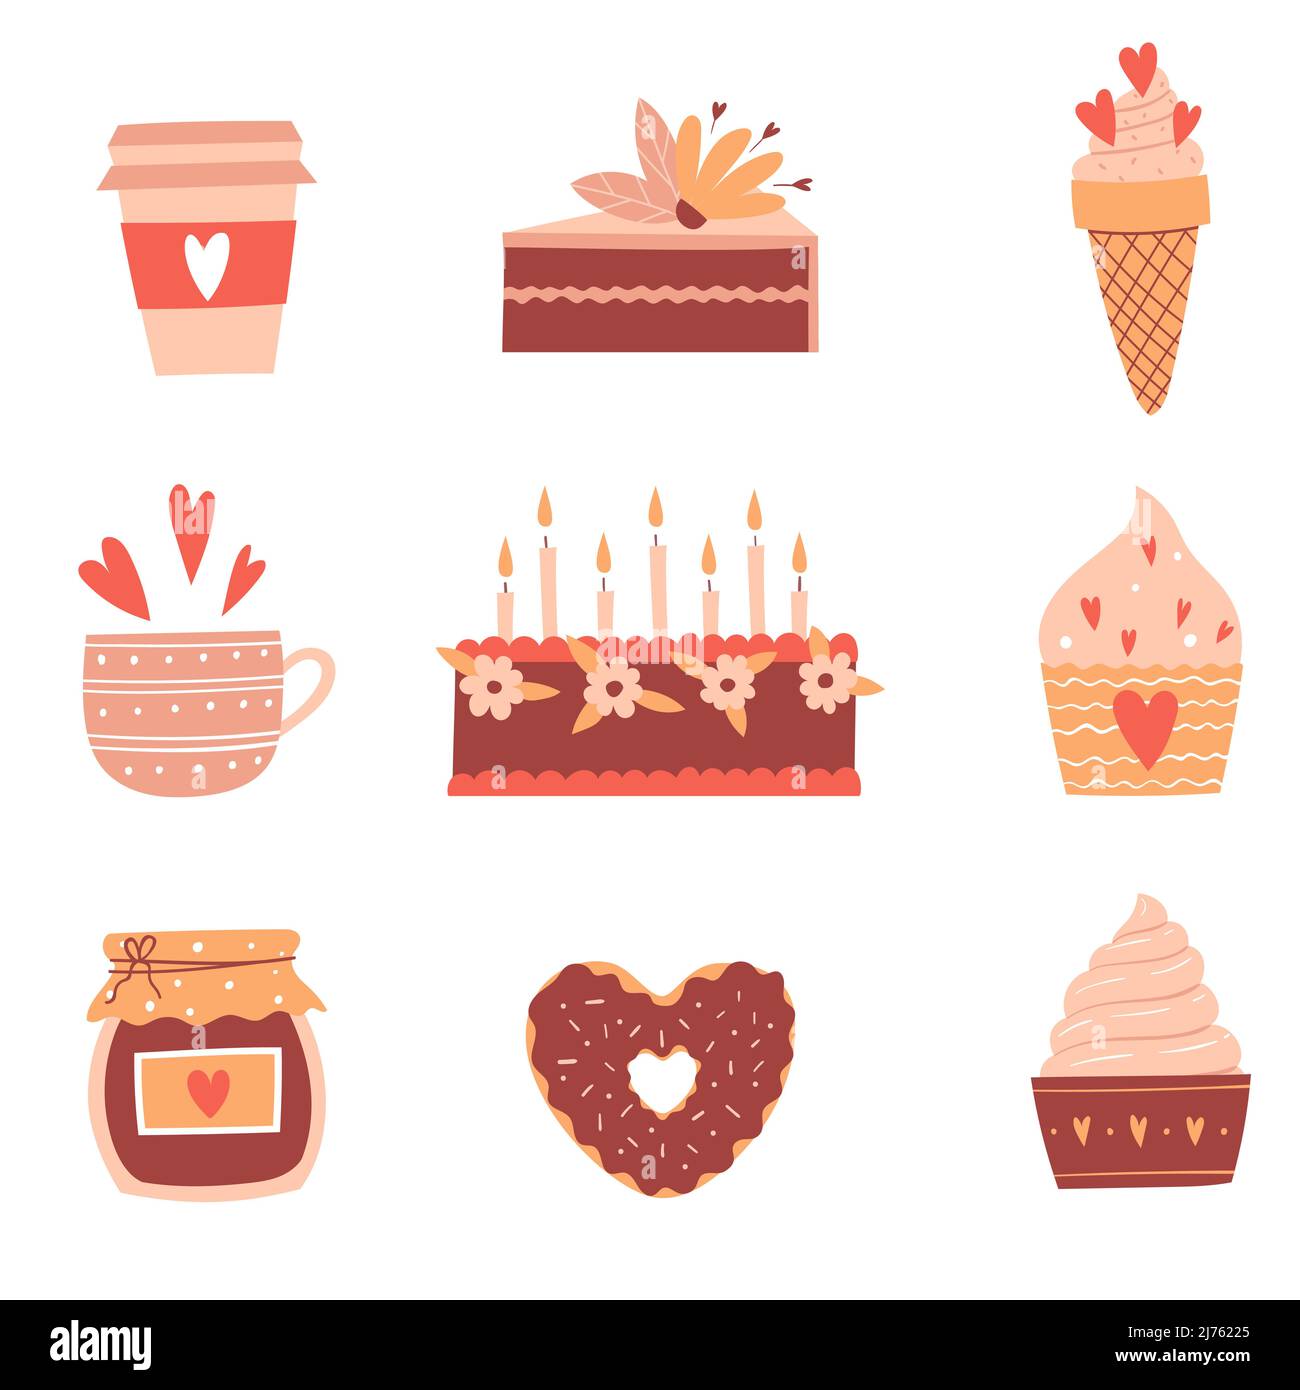 Set with sweet food, pastries, cake, donut, ice cream. Desserts, preserves with a heart. Cute cartoon flat style. Color vector illustrations isolated Stock Vector